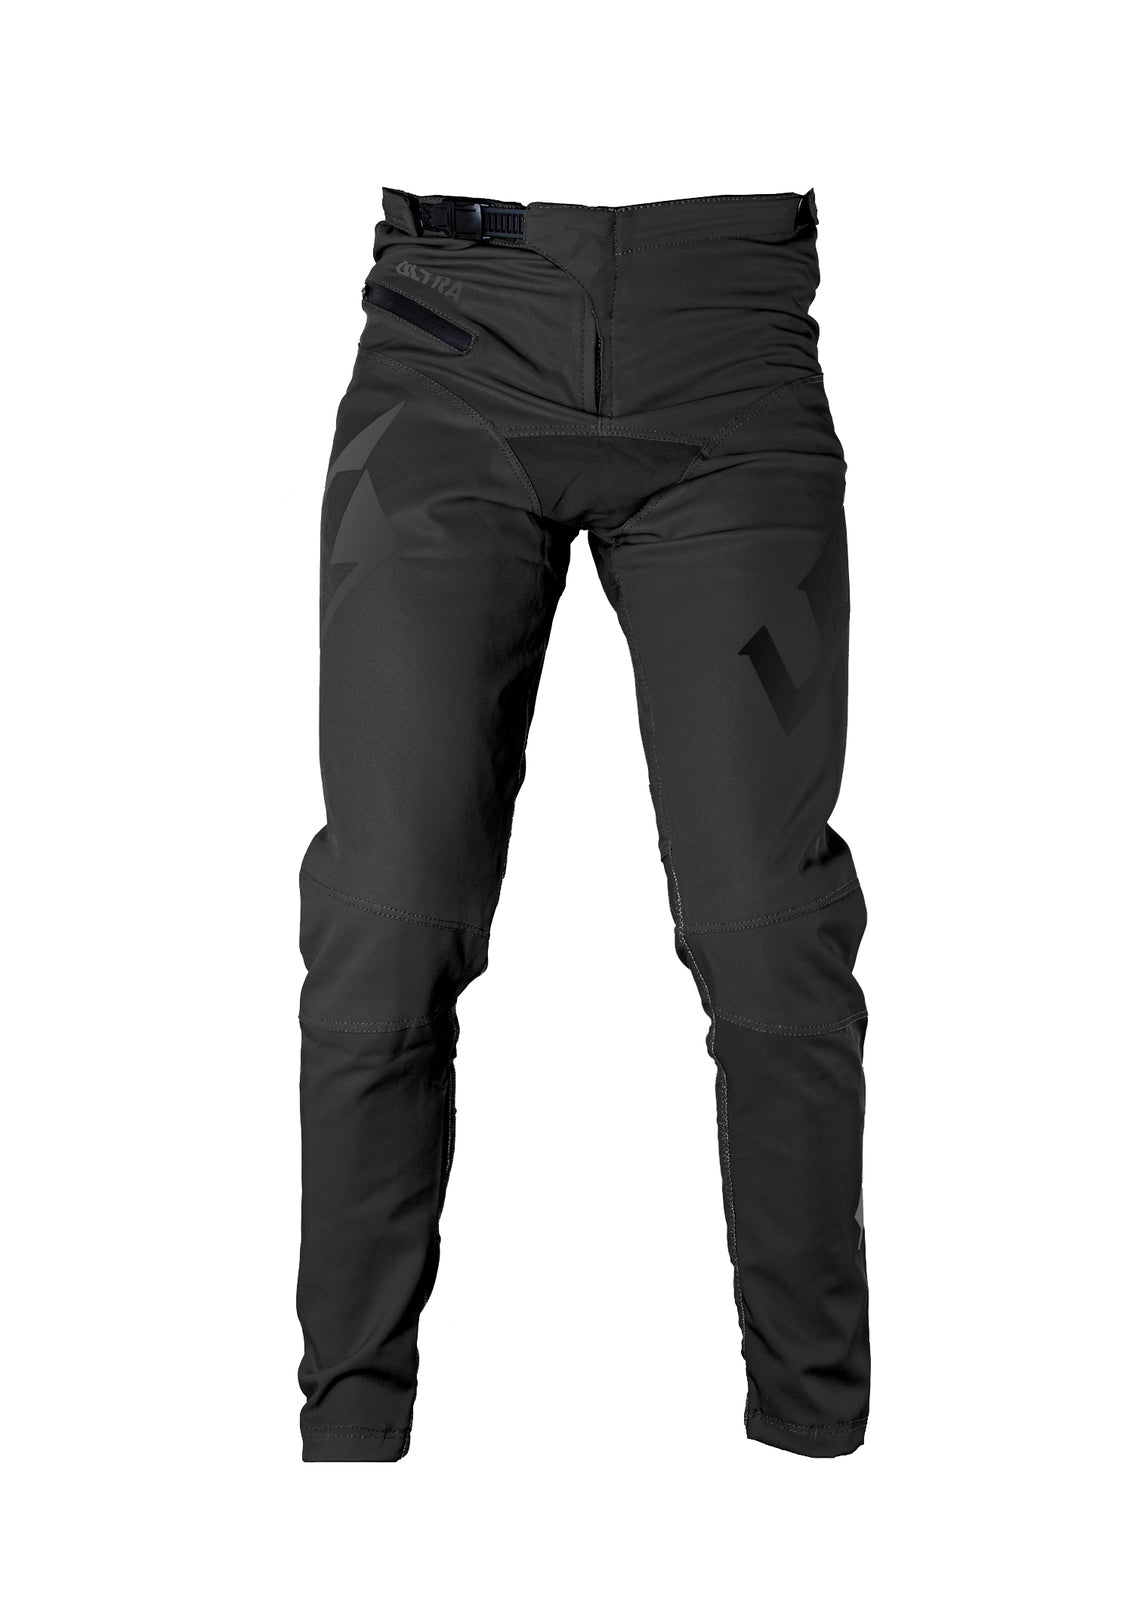 Lead Ultra Youth Pant, a pair of black pants with a zipper on the side designed for reducing drag during races.